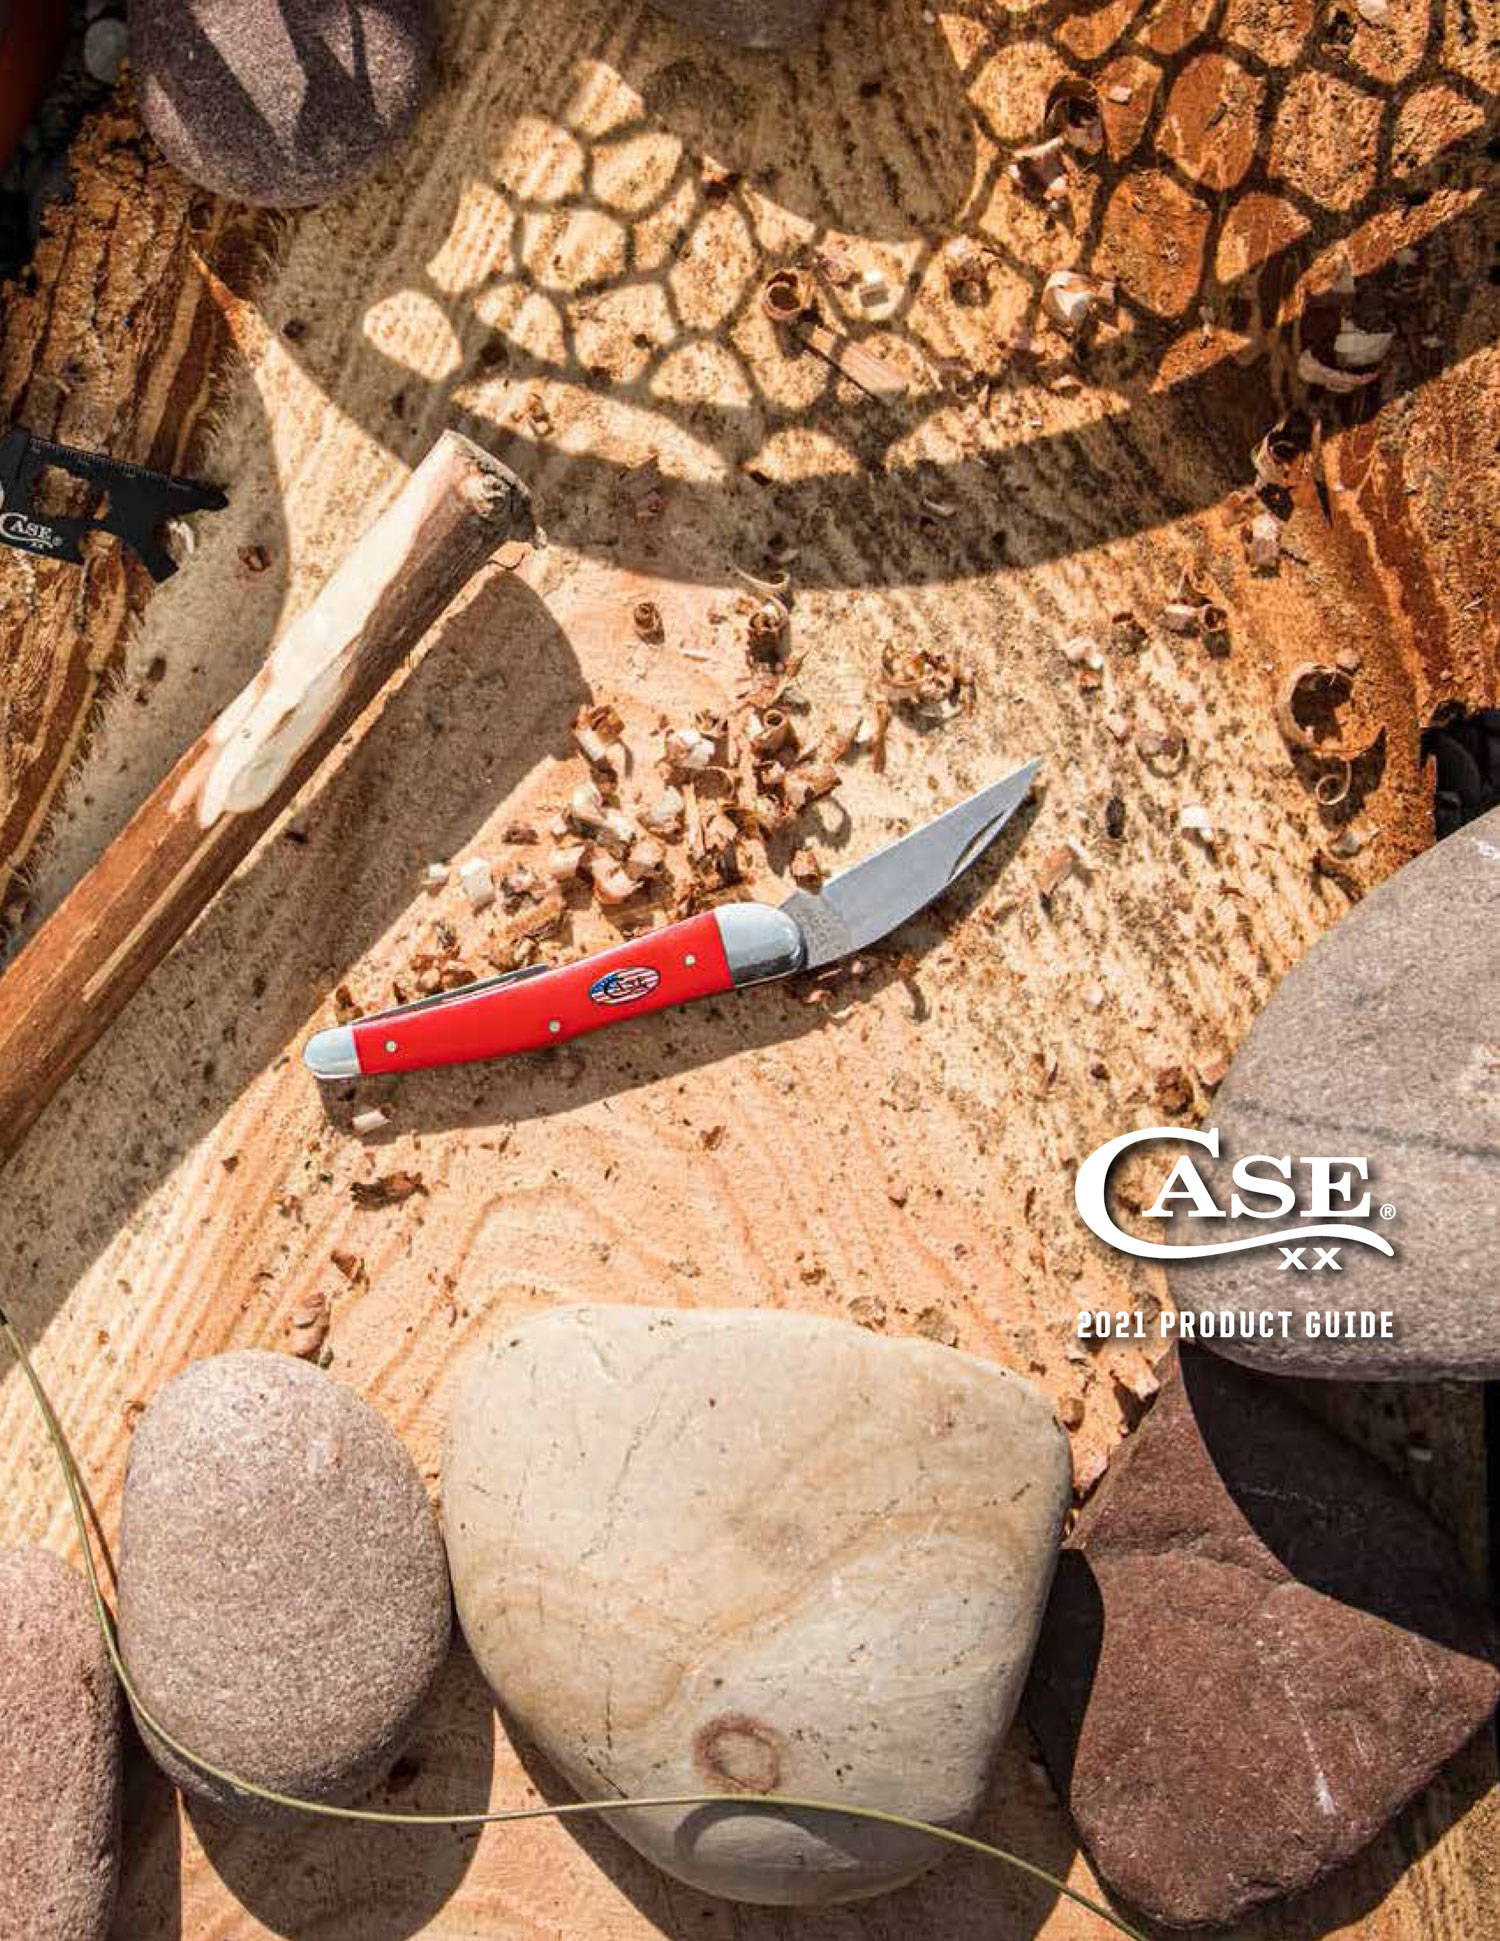 2021 Case Core Product Catalog Cover - Click to download full catalog